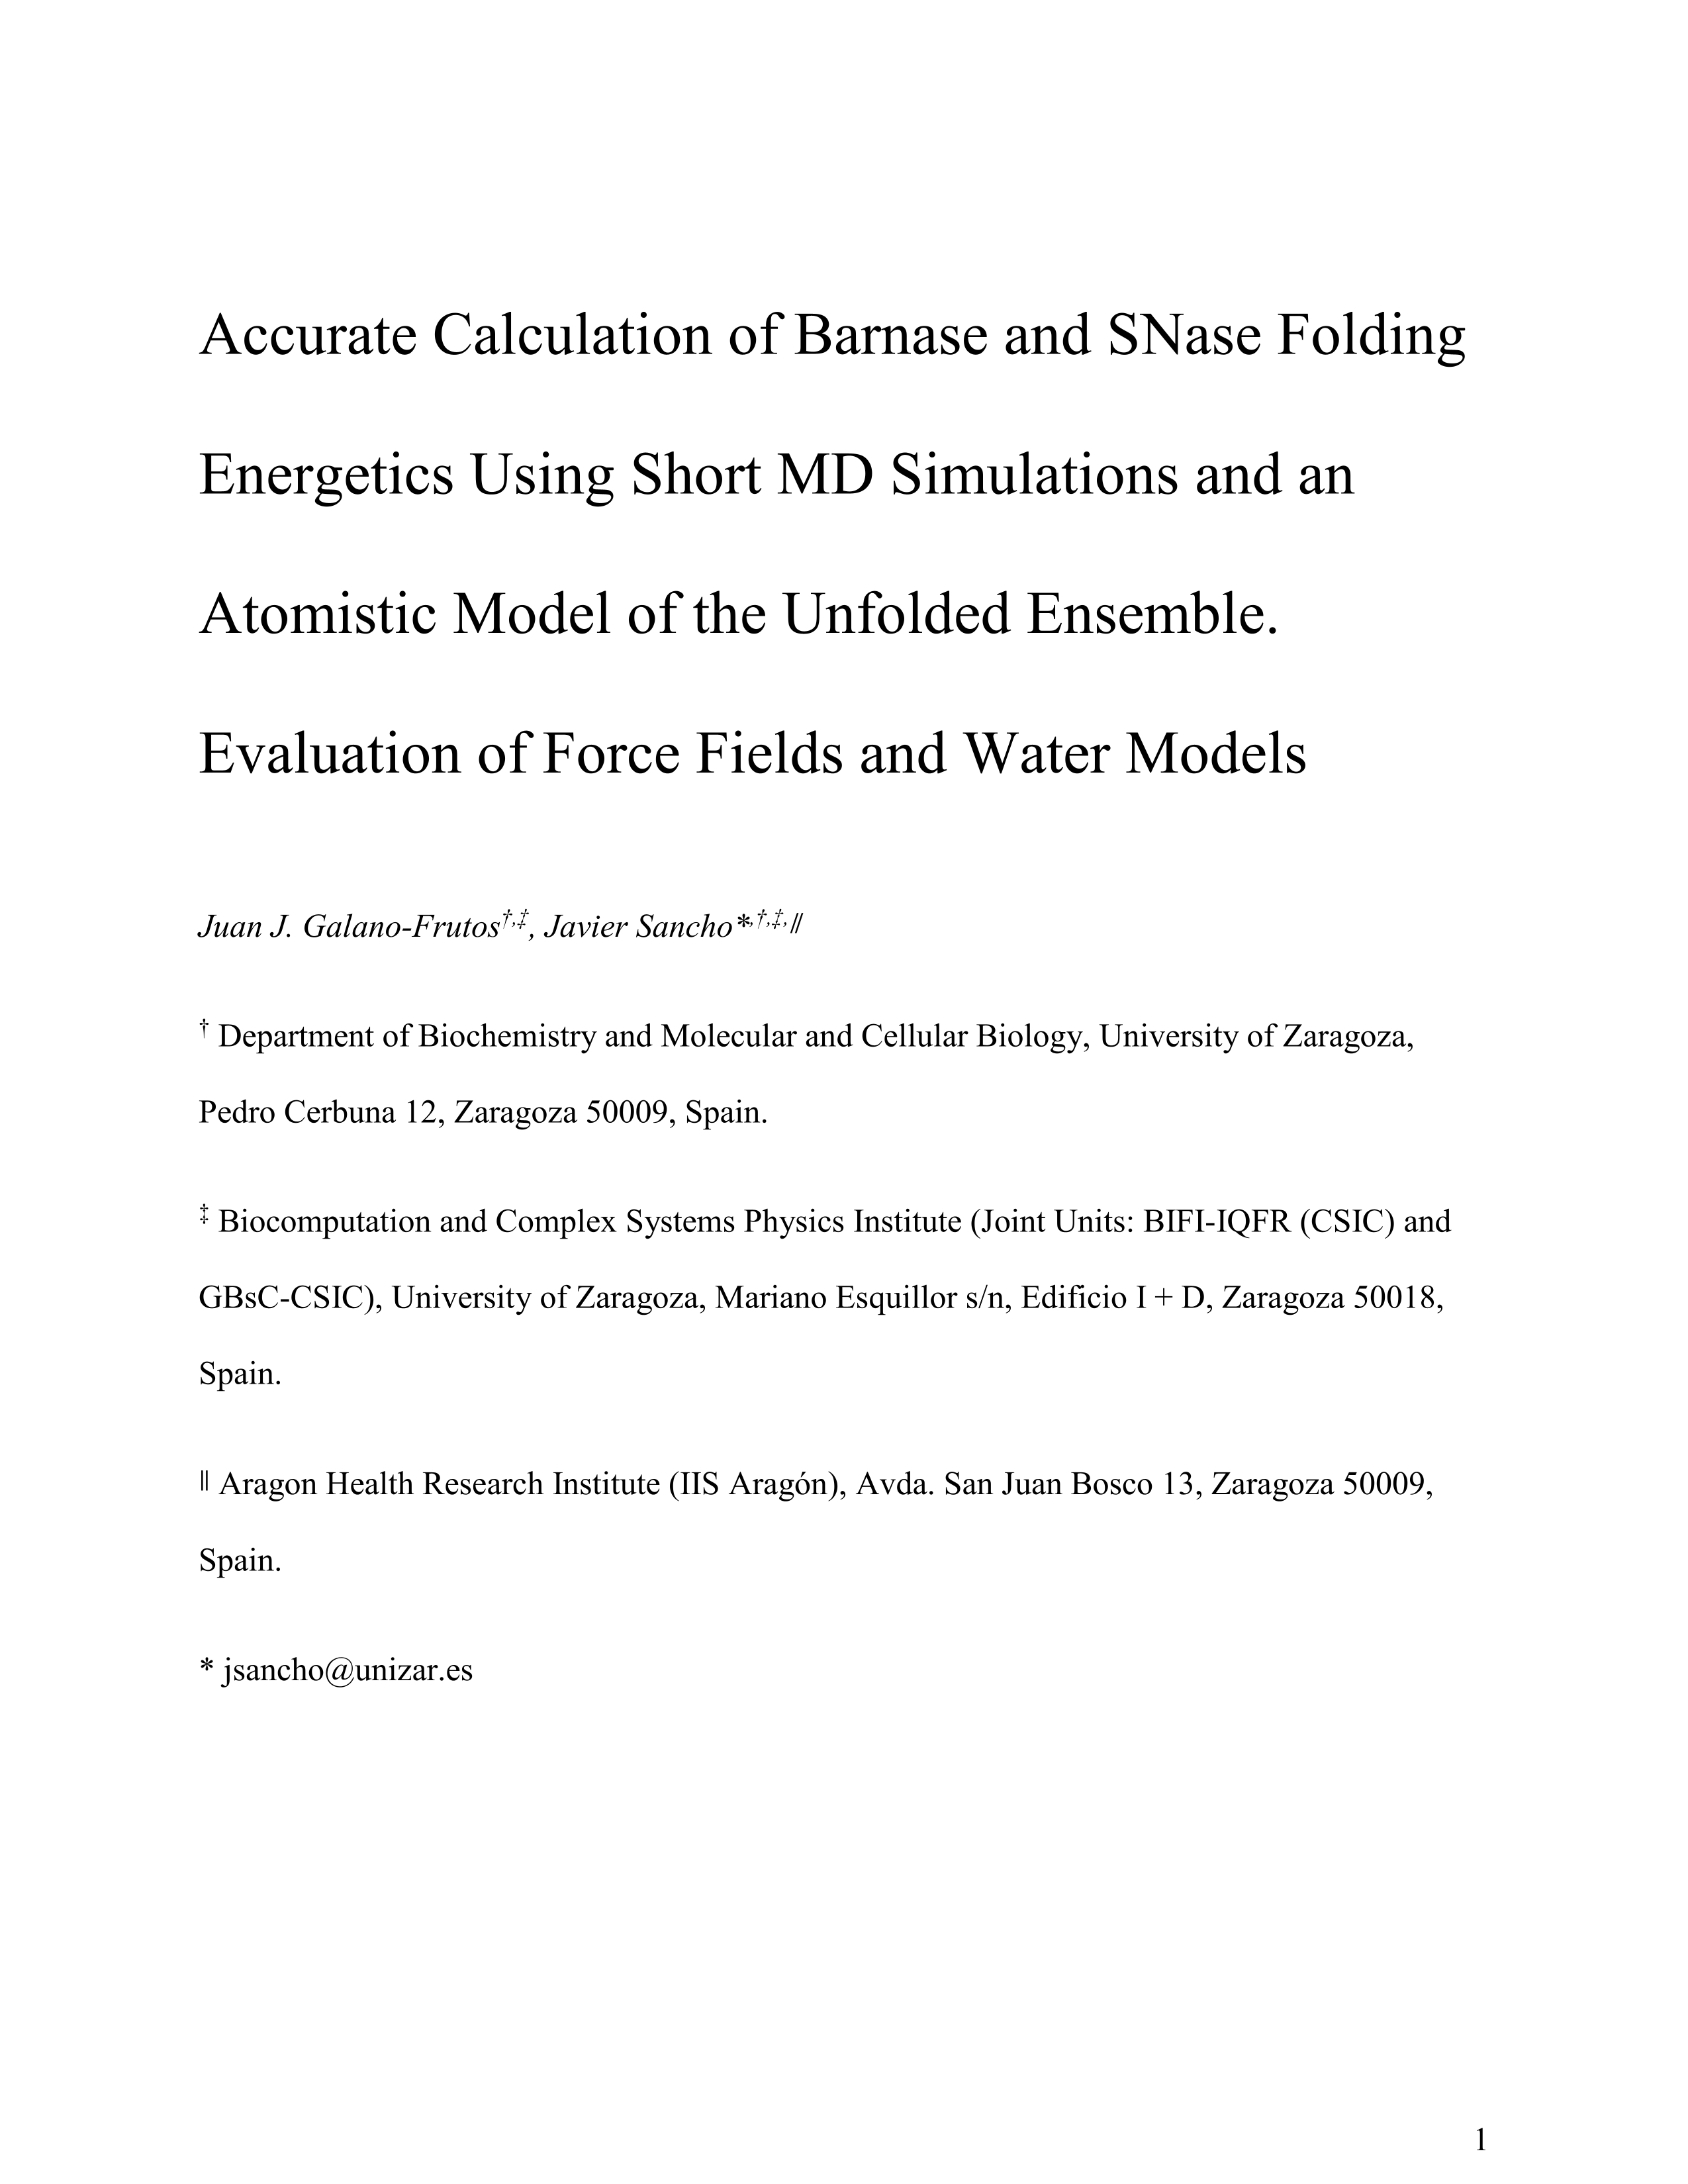 Accurate Calculation of Barnase and SNase Folding Energetics Using Short Molecular Dynamics Simulations and an Atomistic Model of the Unfolded Ensemble: Evaluation of Force Fields and Water Models